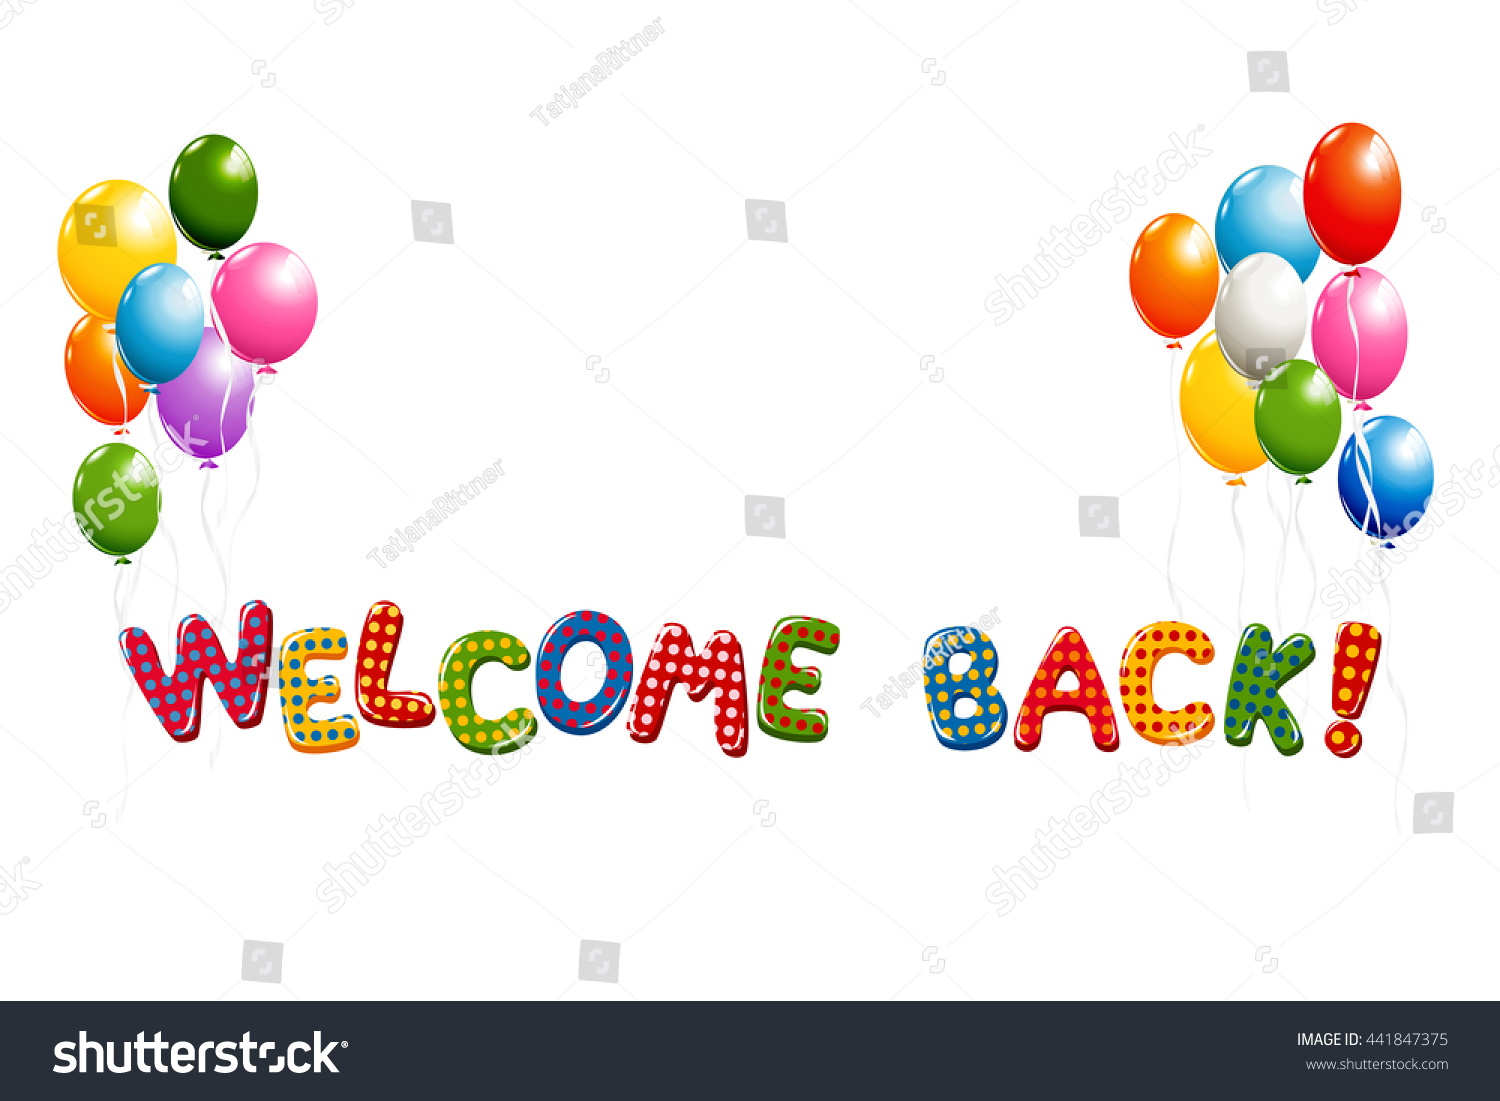 stock photo welcome back text in colorful polka dot design with balloons 441847375